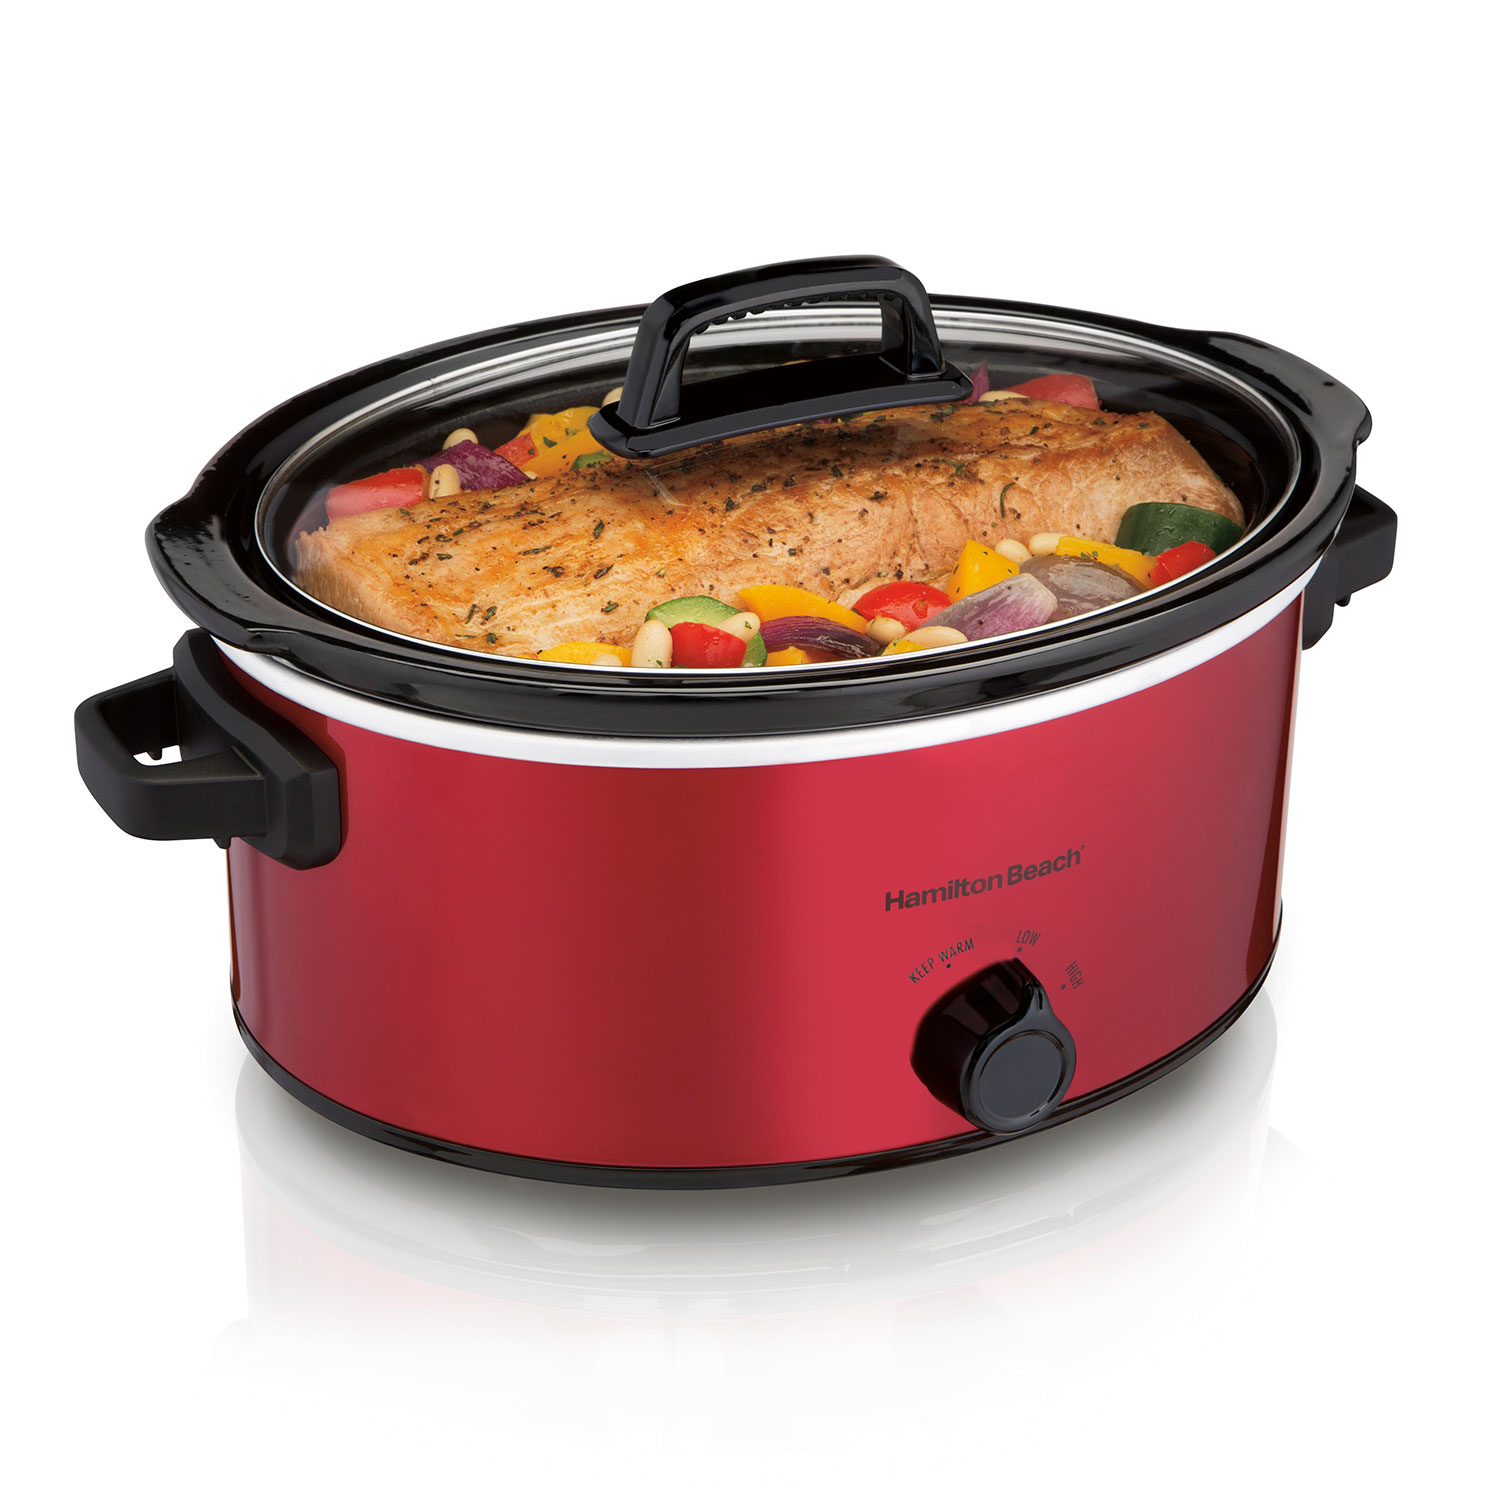 6 Quart Oval Slow Cooker, Red (33666F)